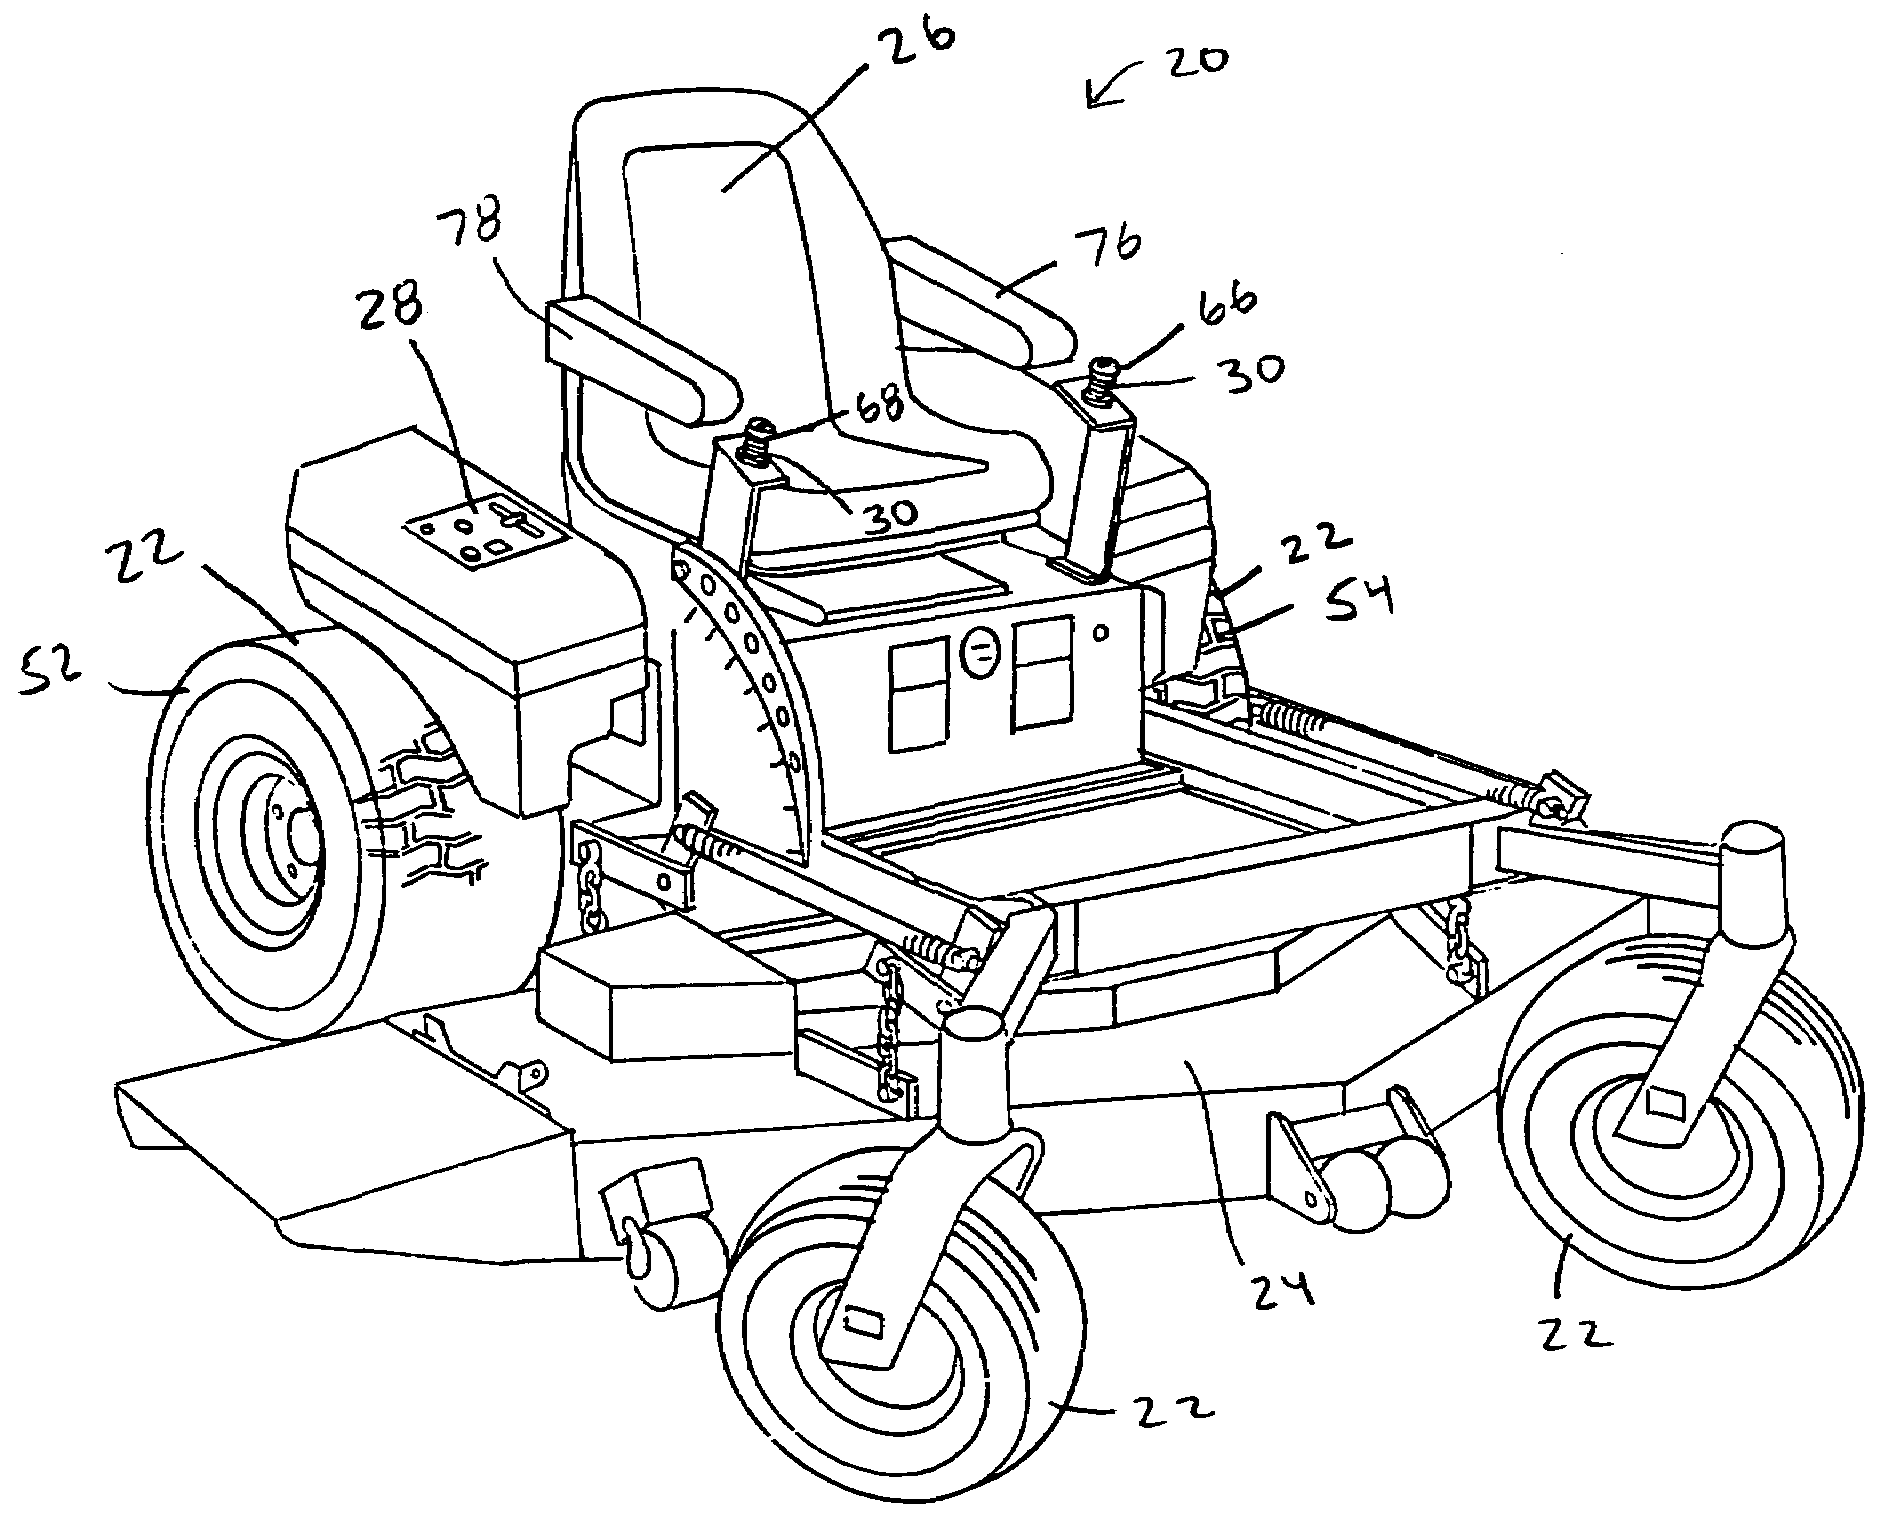 Drive-by-wire lawnmower